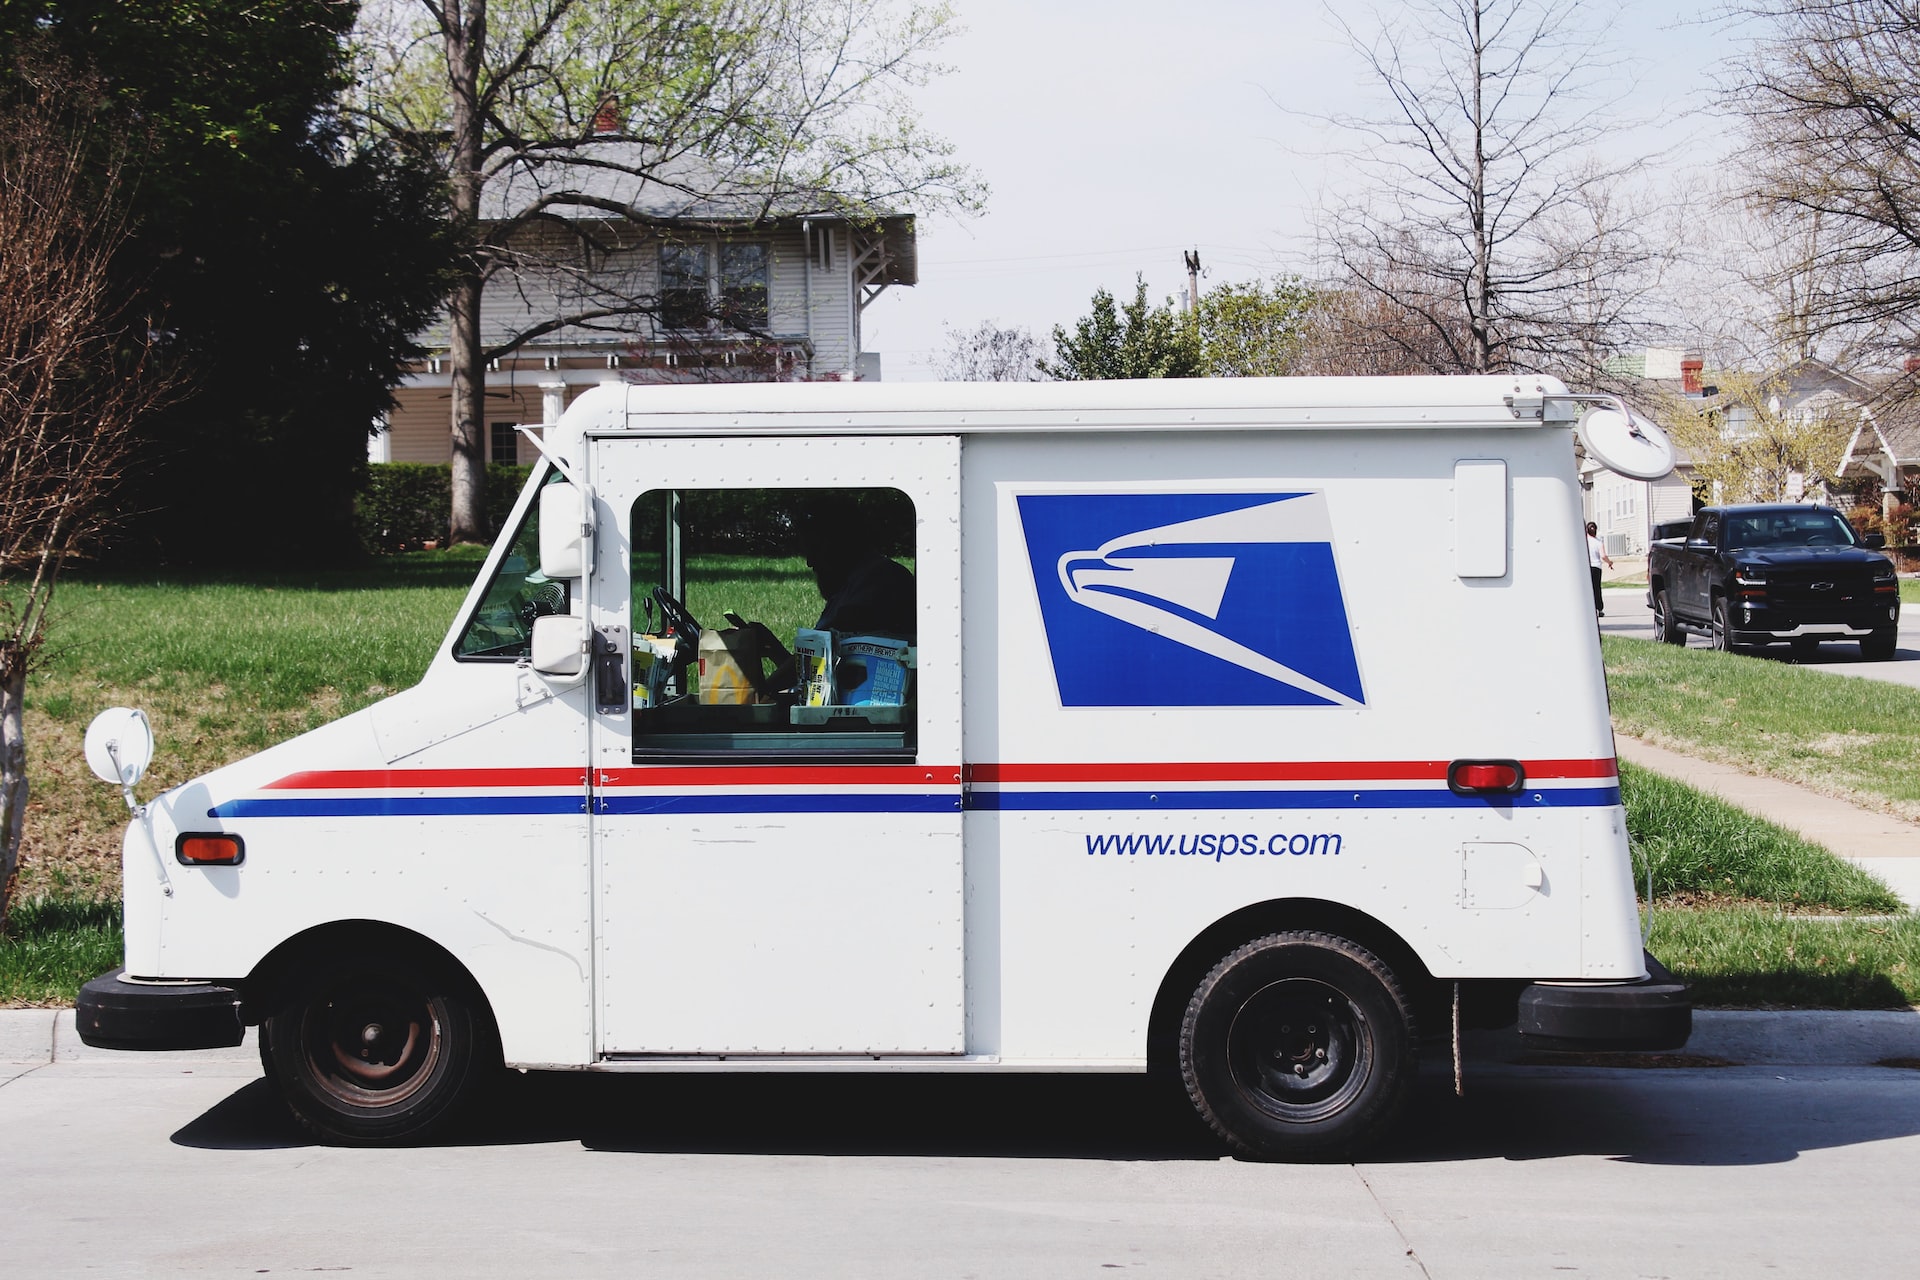 How to Track a Package: USPS, UPS, FedEx, or Self-Delivery